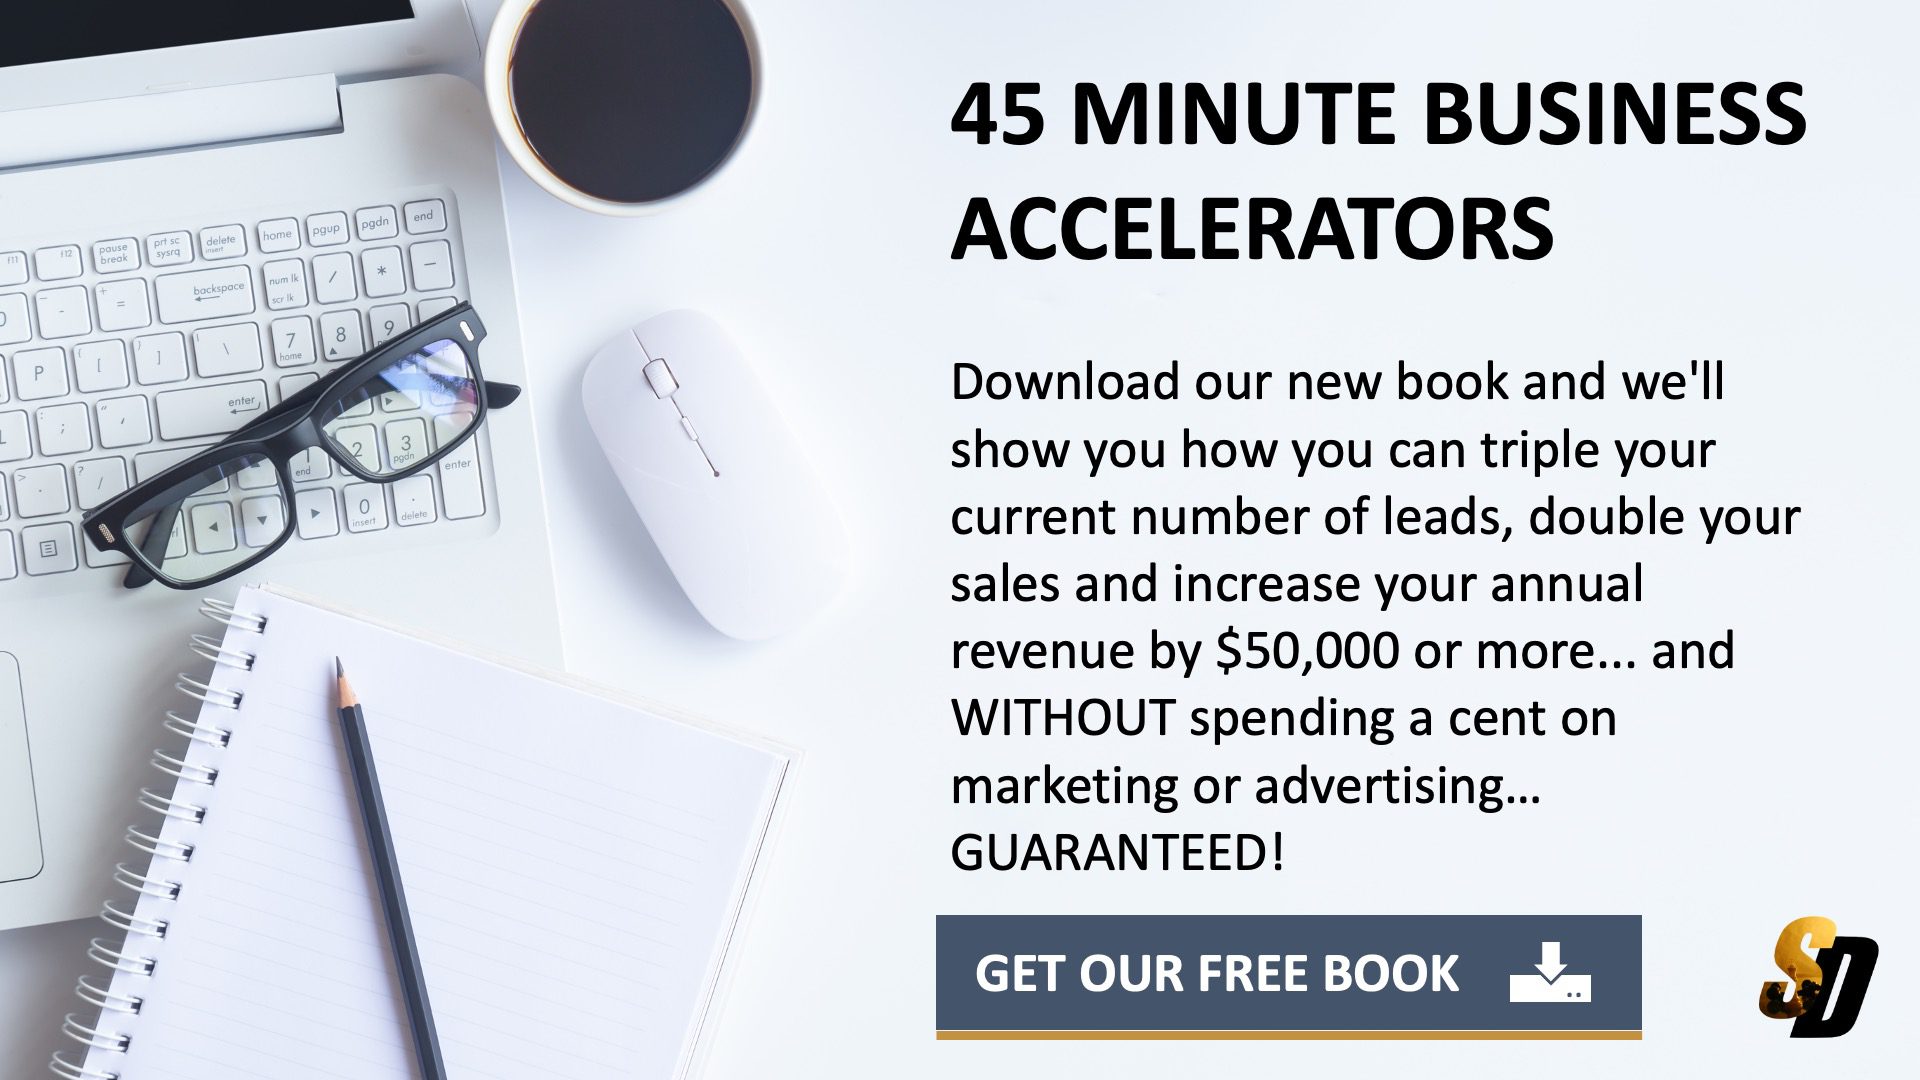 StrategyDriven's 45 Minute Business Accelerators eBook